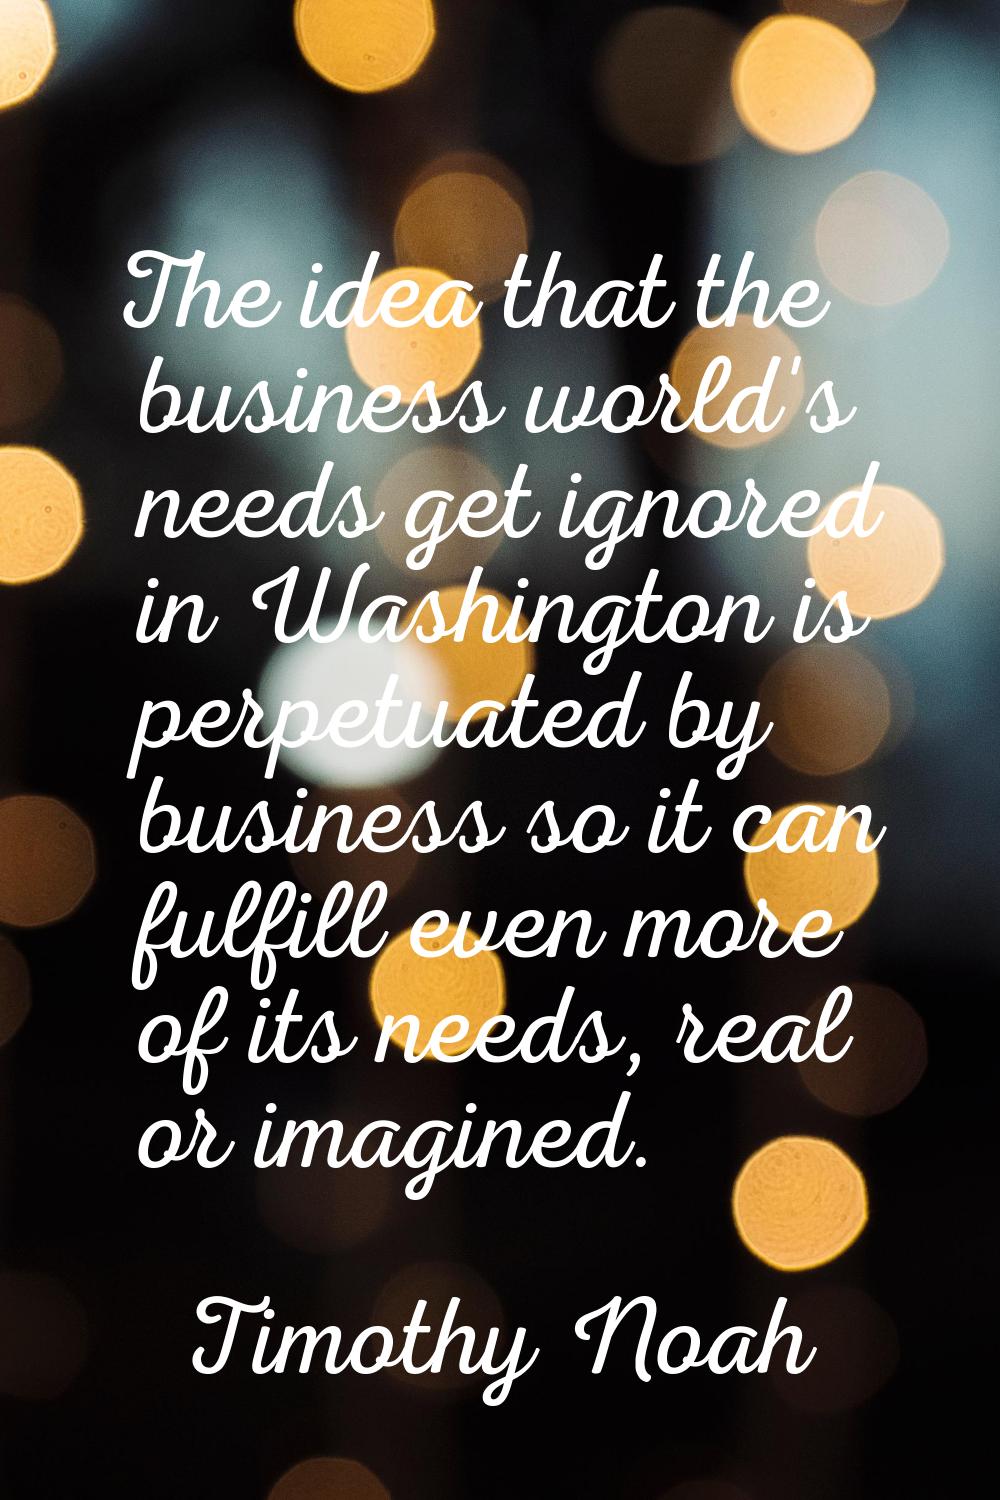 The idea that the business world's needs get ignored in Washington is perpetuated by business so it